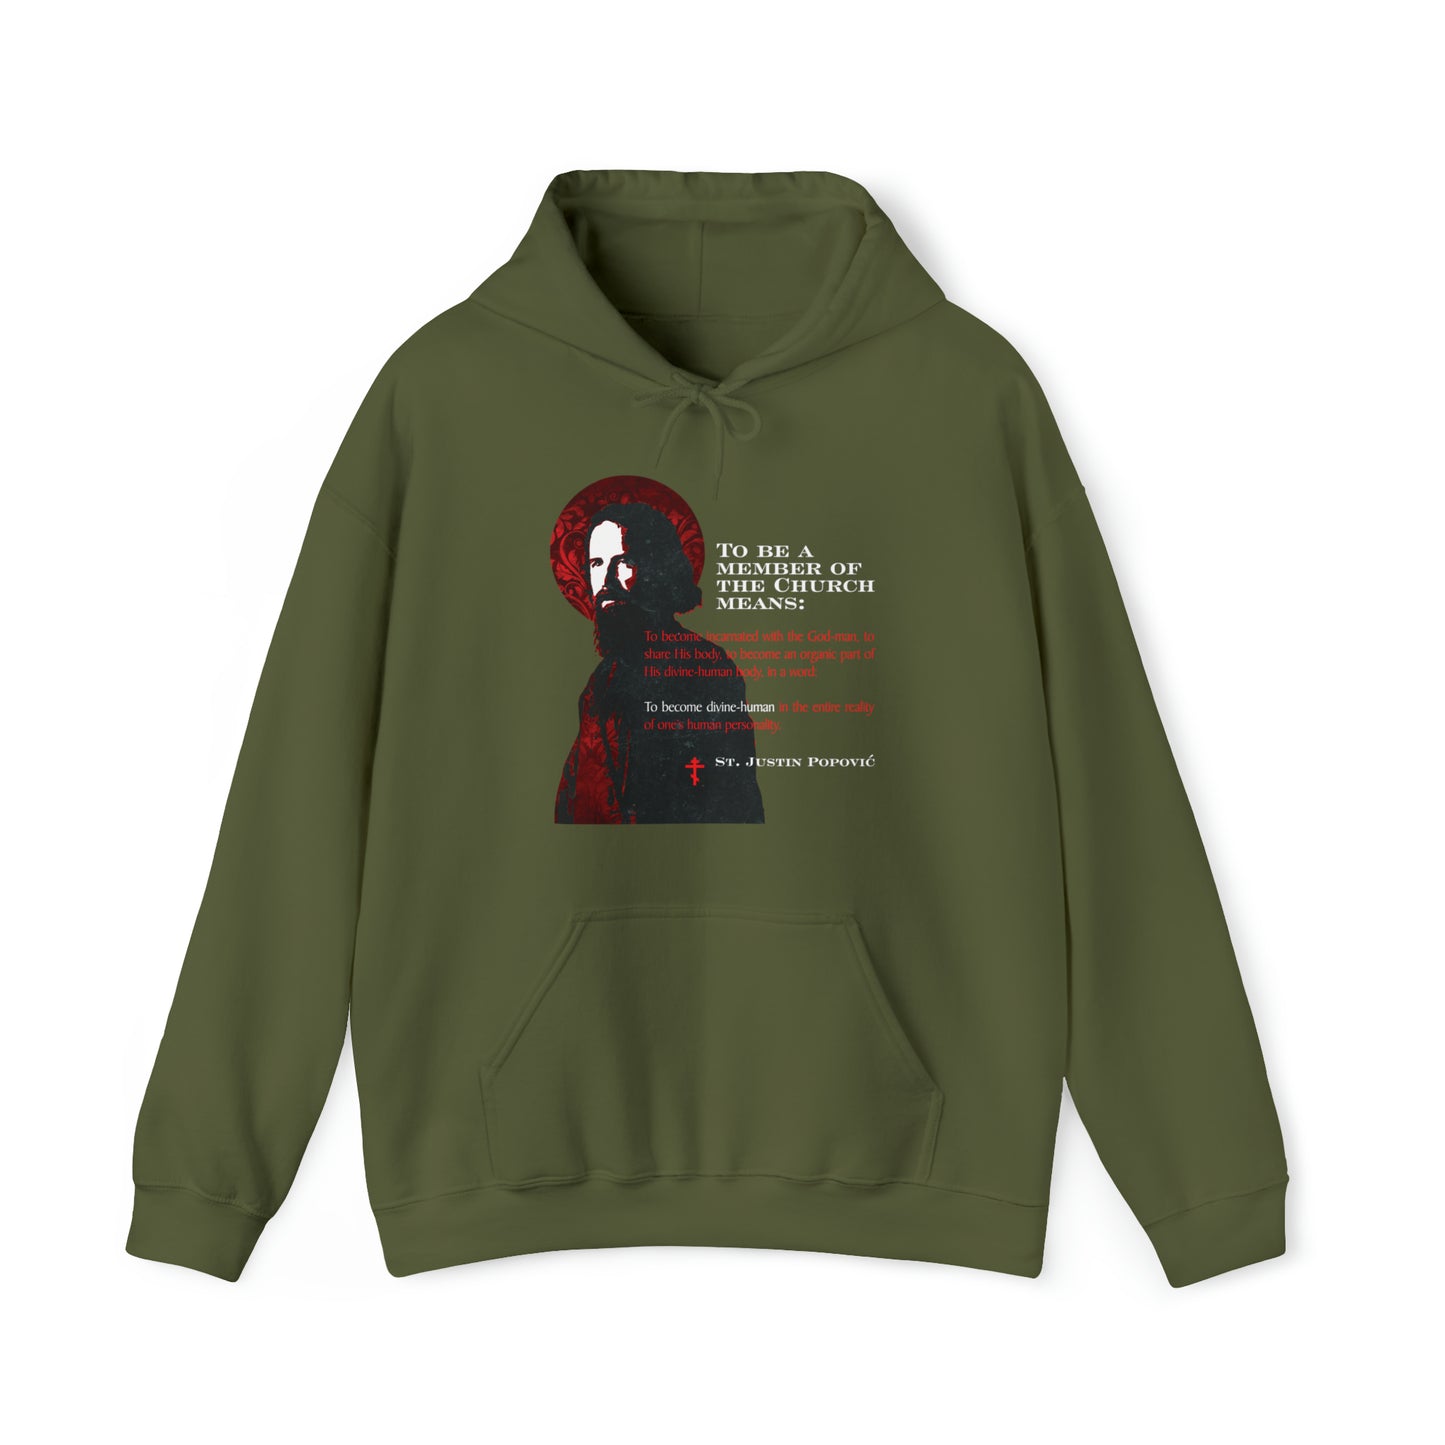 To Be a Member of the Church (St. Justin Popovic) No. 1 | Orthodox Christian Hoodie / Hooded Sweatshirt